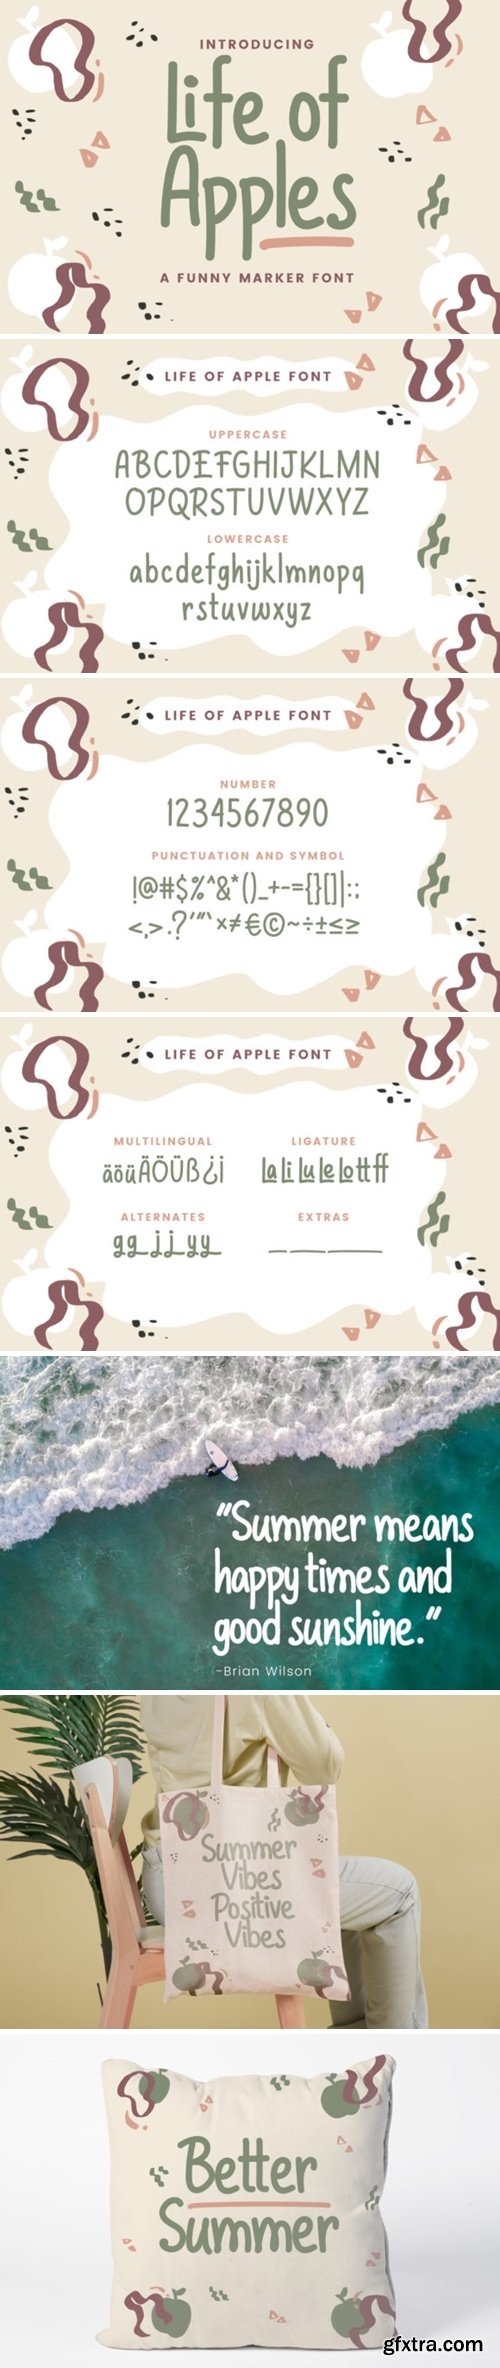 Life of Apples Font